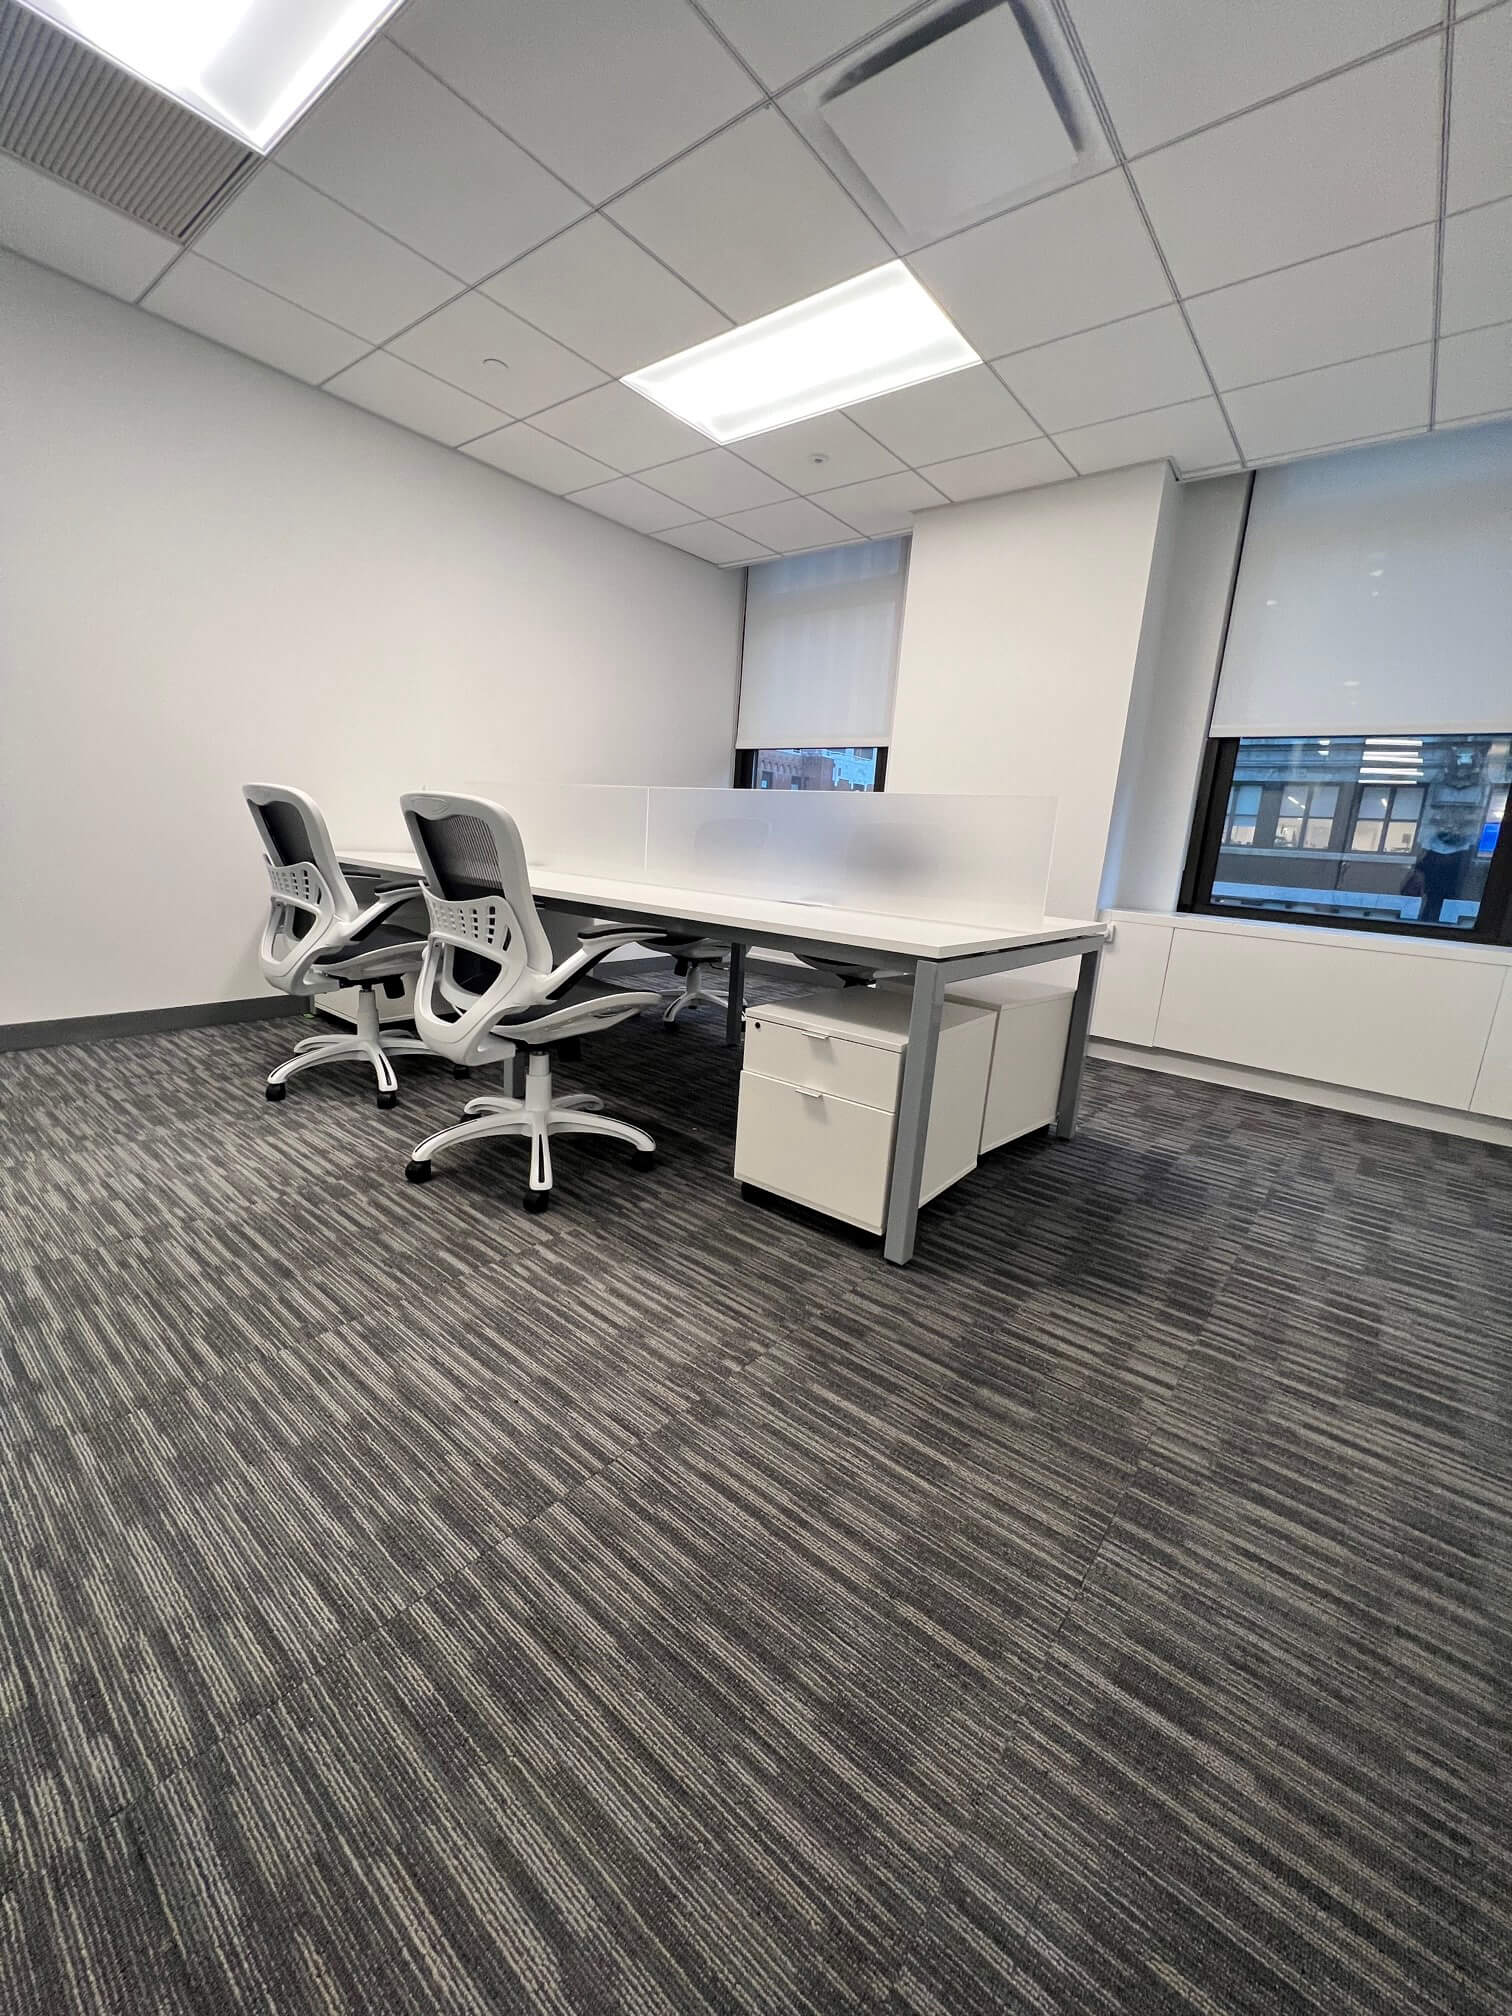 PTIOF, New Jersey’s top office furniture store, can provide in-office floor planning free of charge and will subsequently work with you throughout the entire buying process.